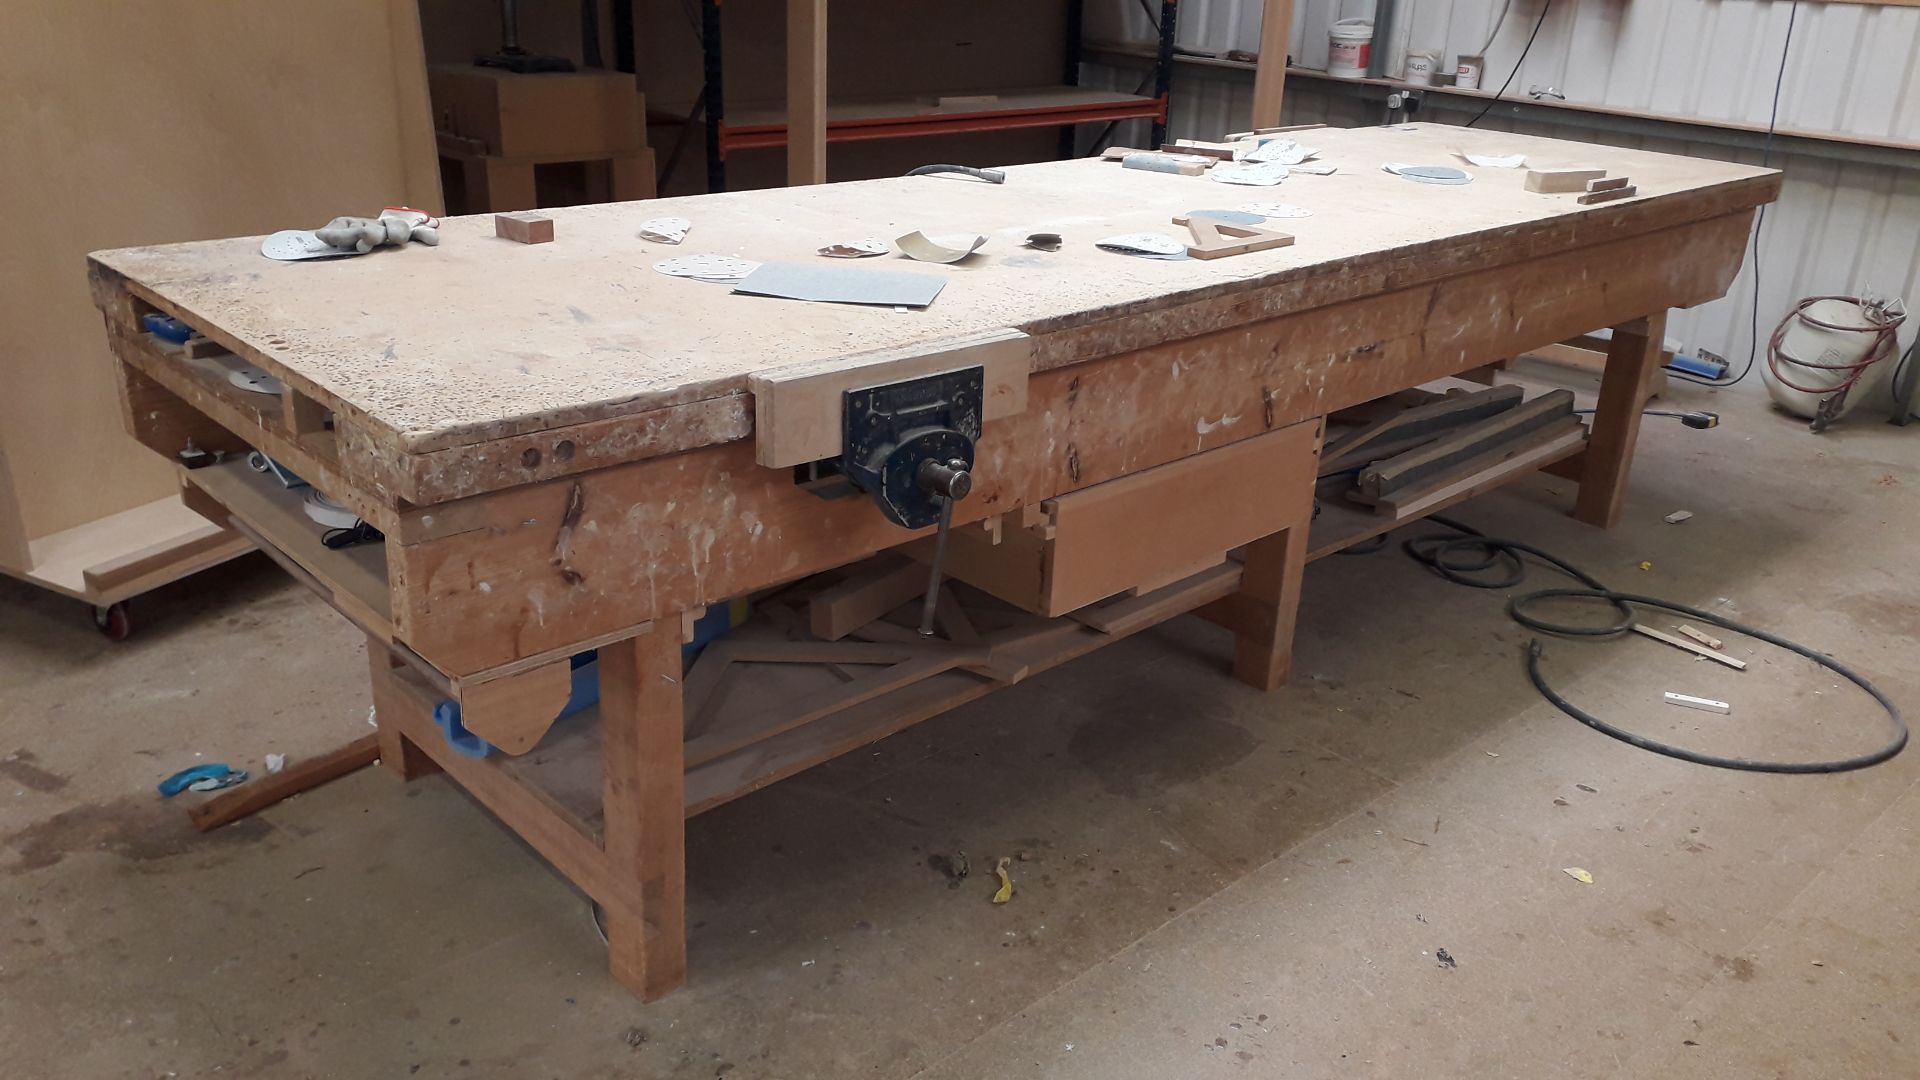 3x Timber Workbenches with Vice and Storage Under, Approx 4m x 1m - Located on 1st Floor. Contents - Image 6 of 7